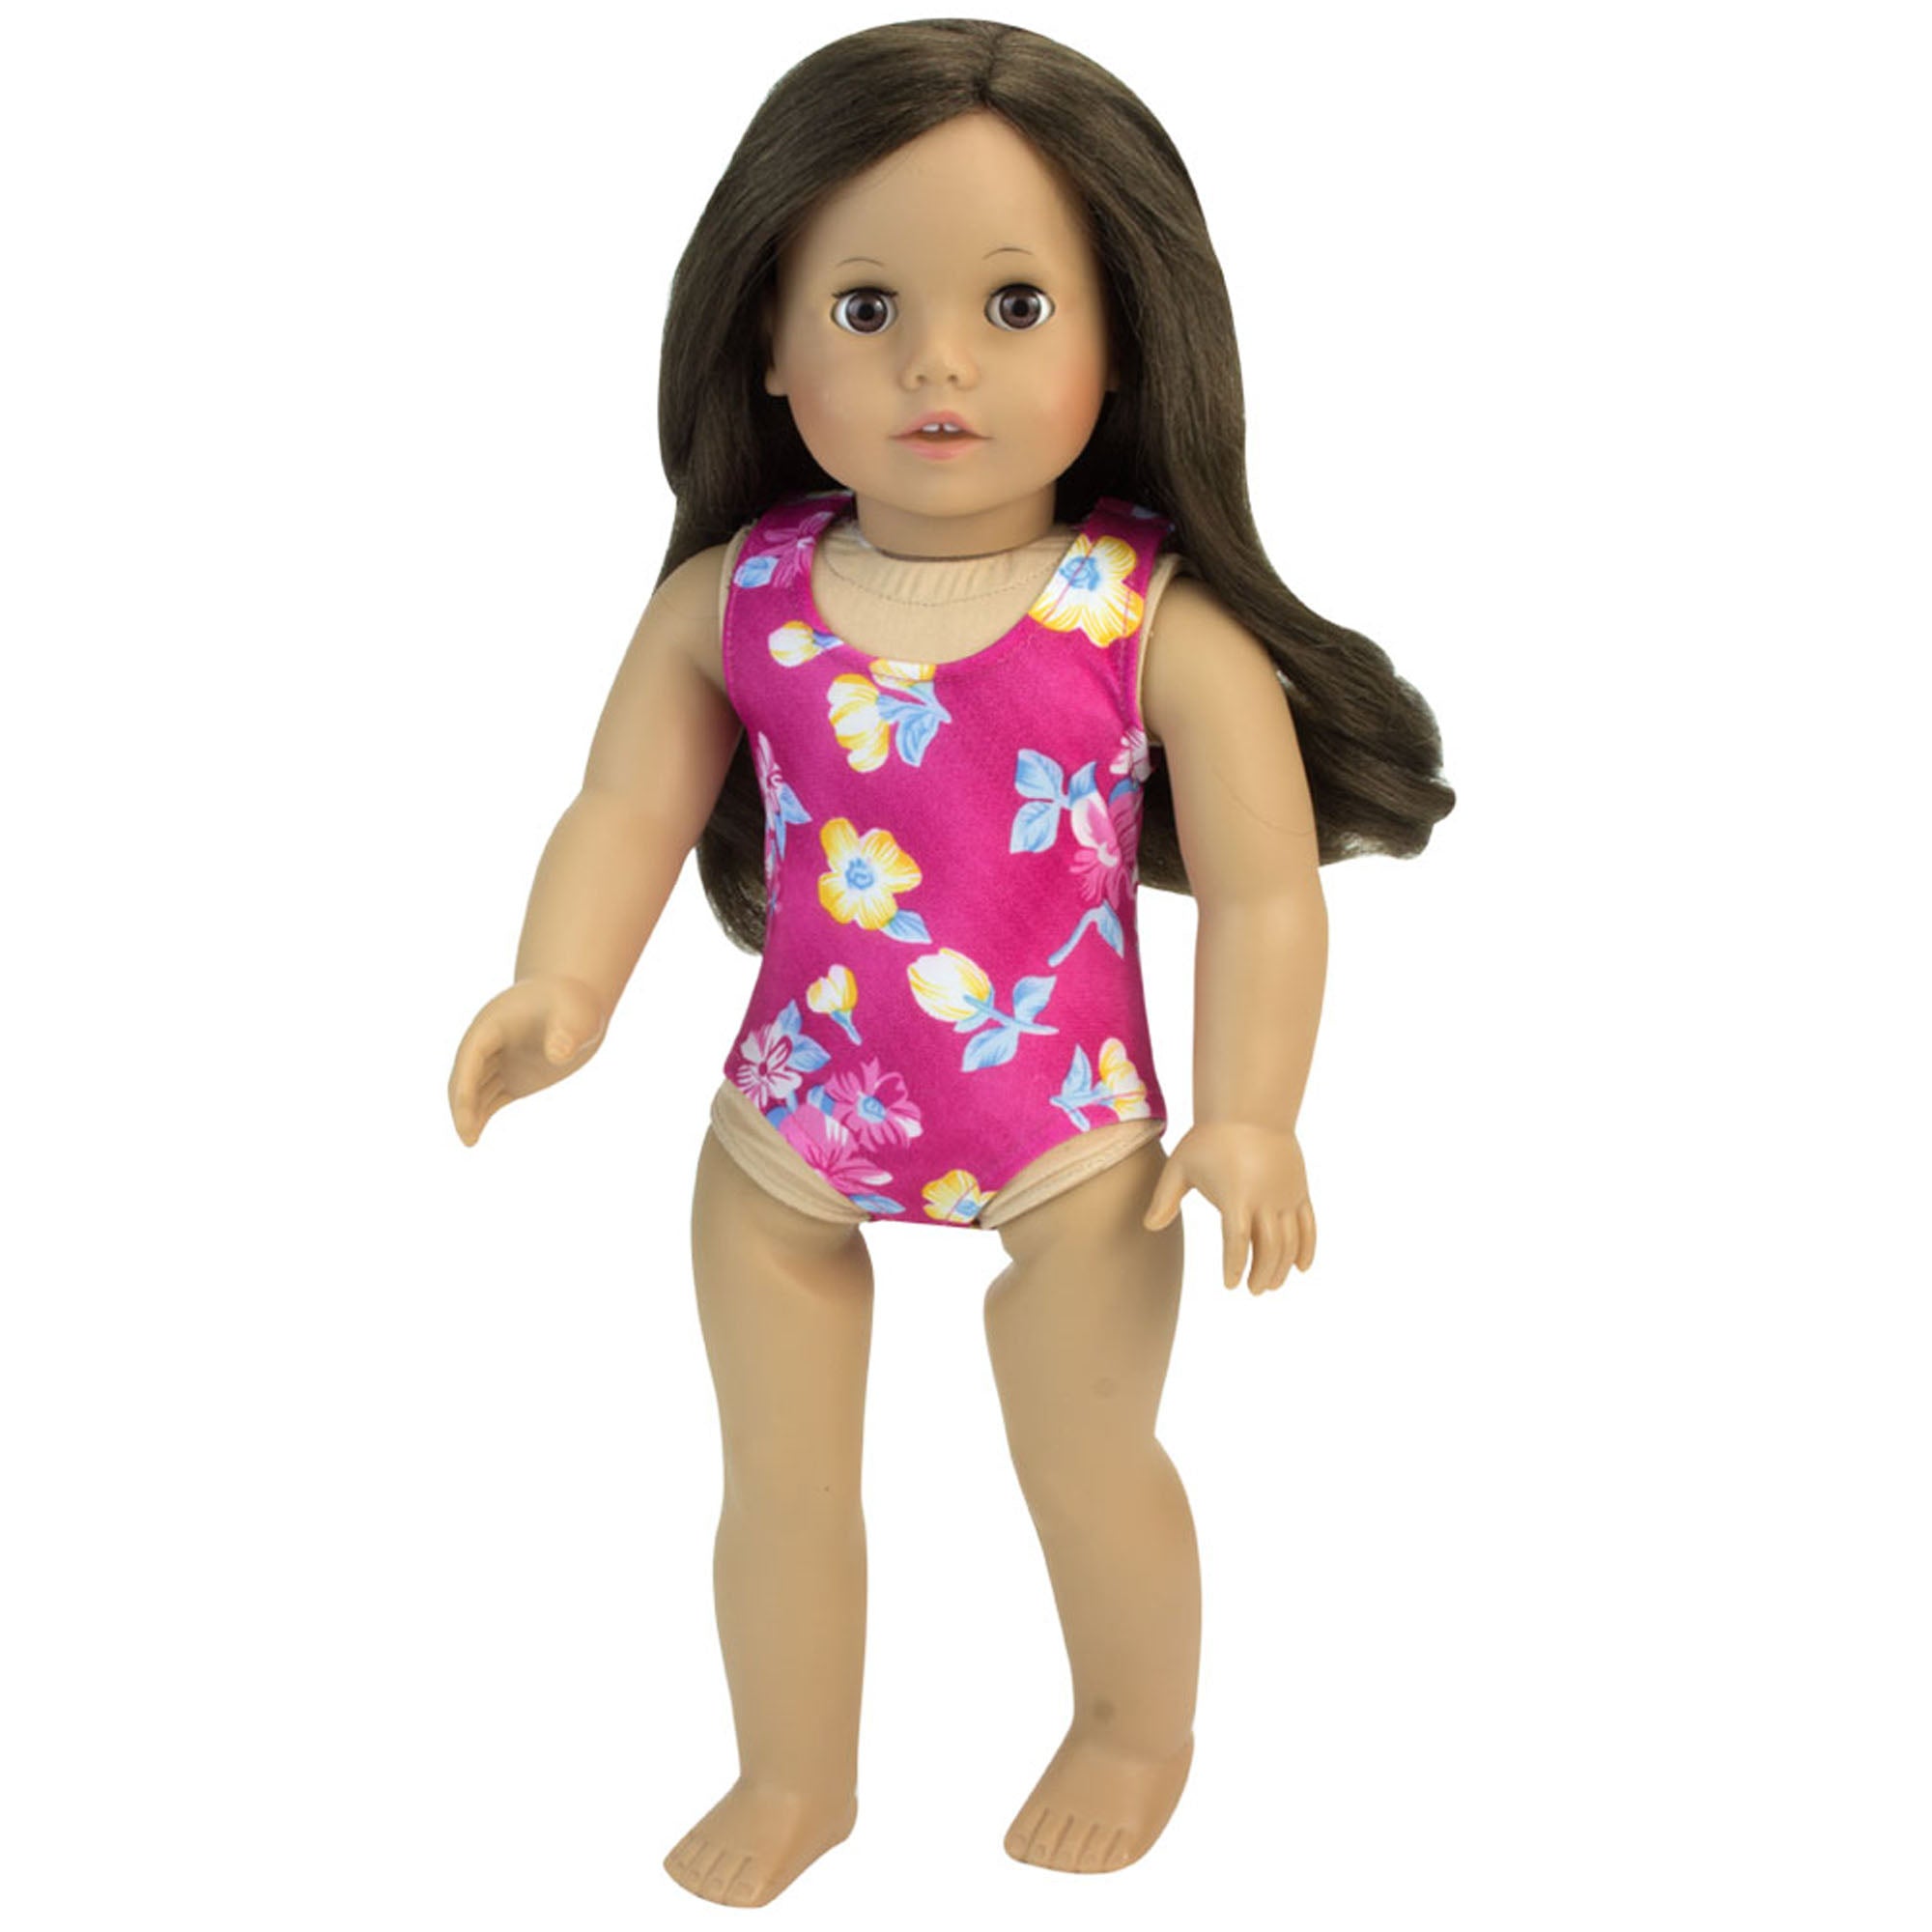 Sophia's 3 Piece Swim Set Includes Floral Swimsuit, Water Goggles and Sandals for 18" Dolls, Hot Pink